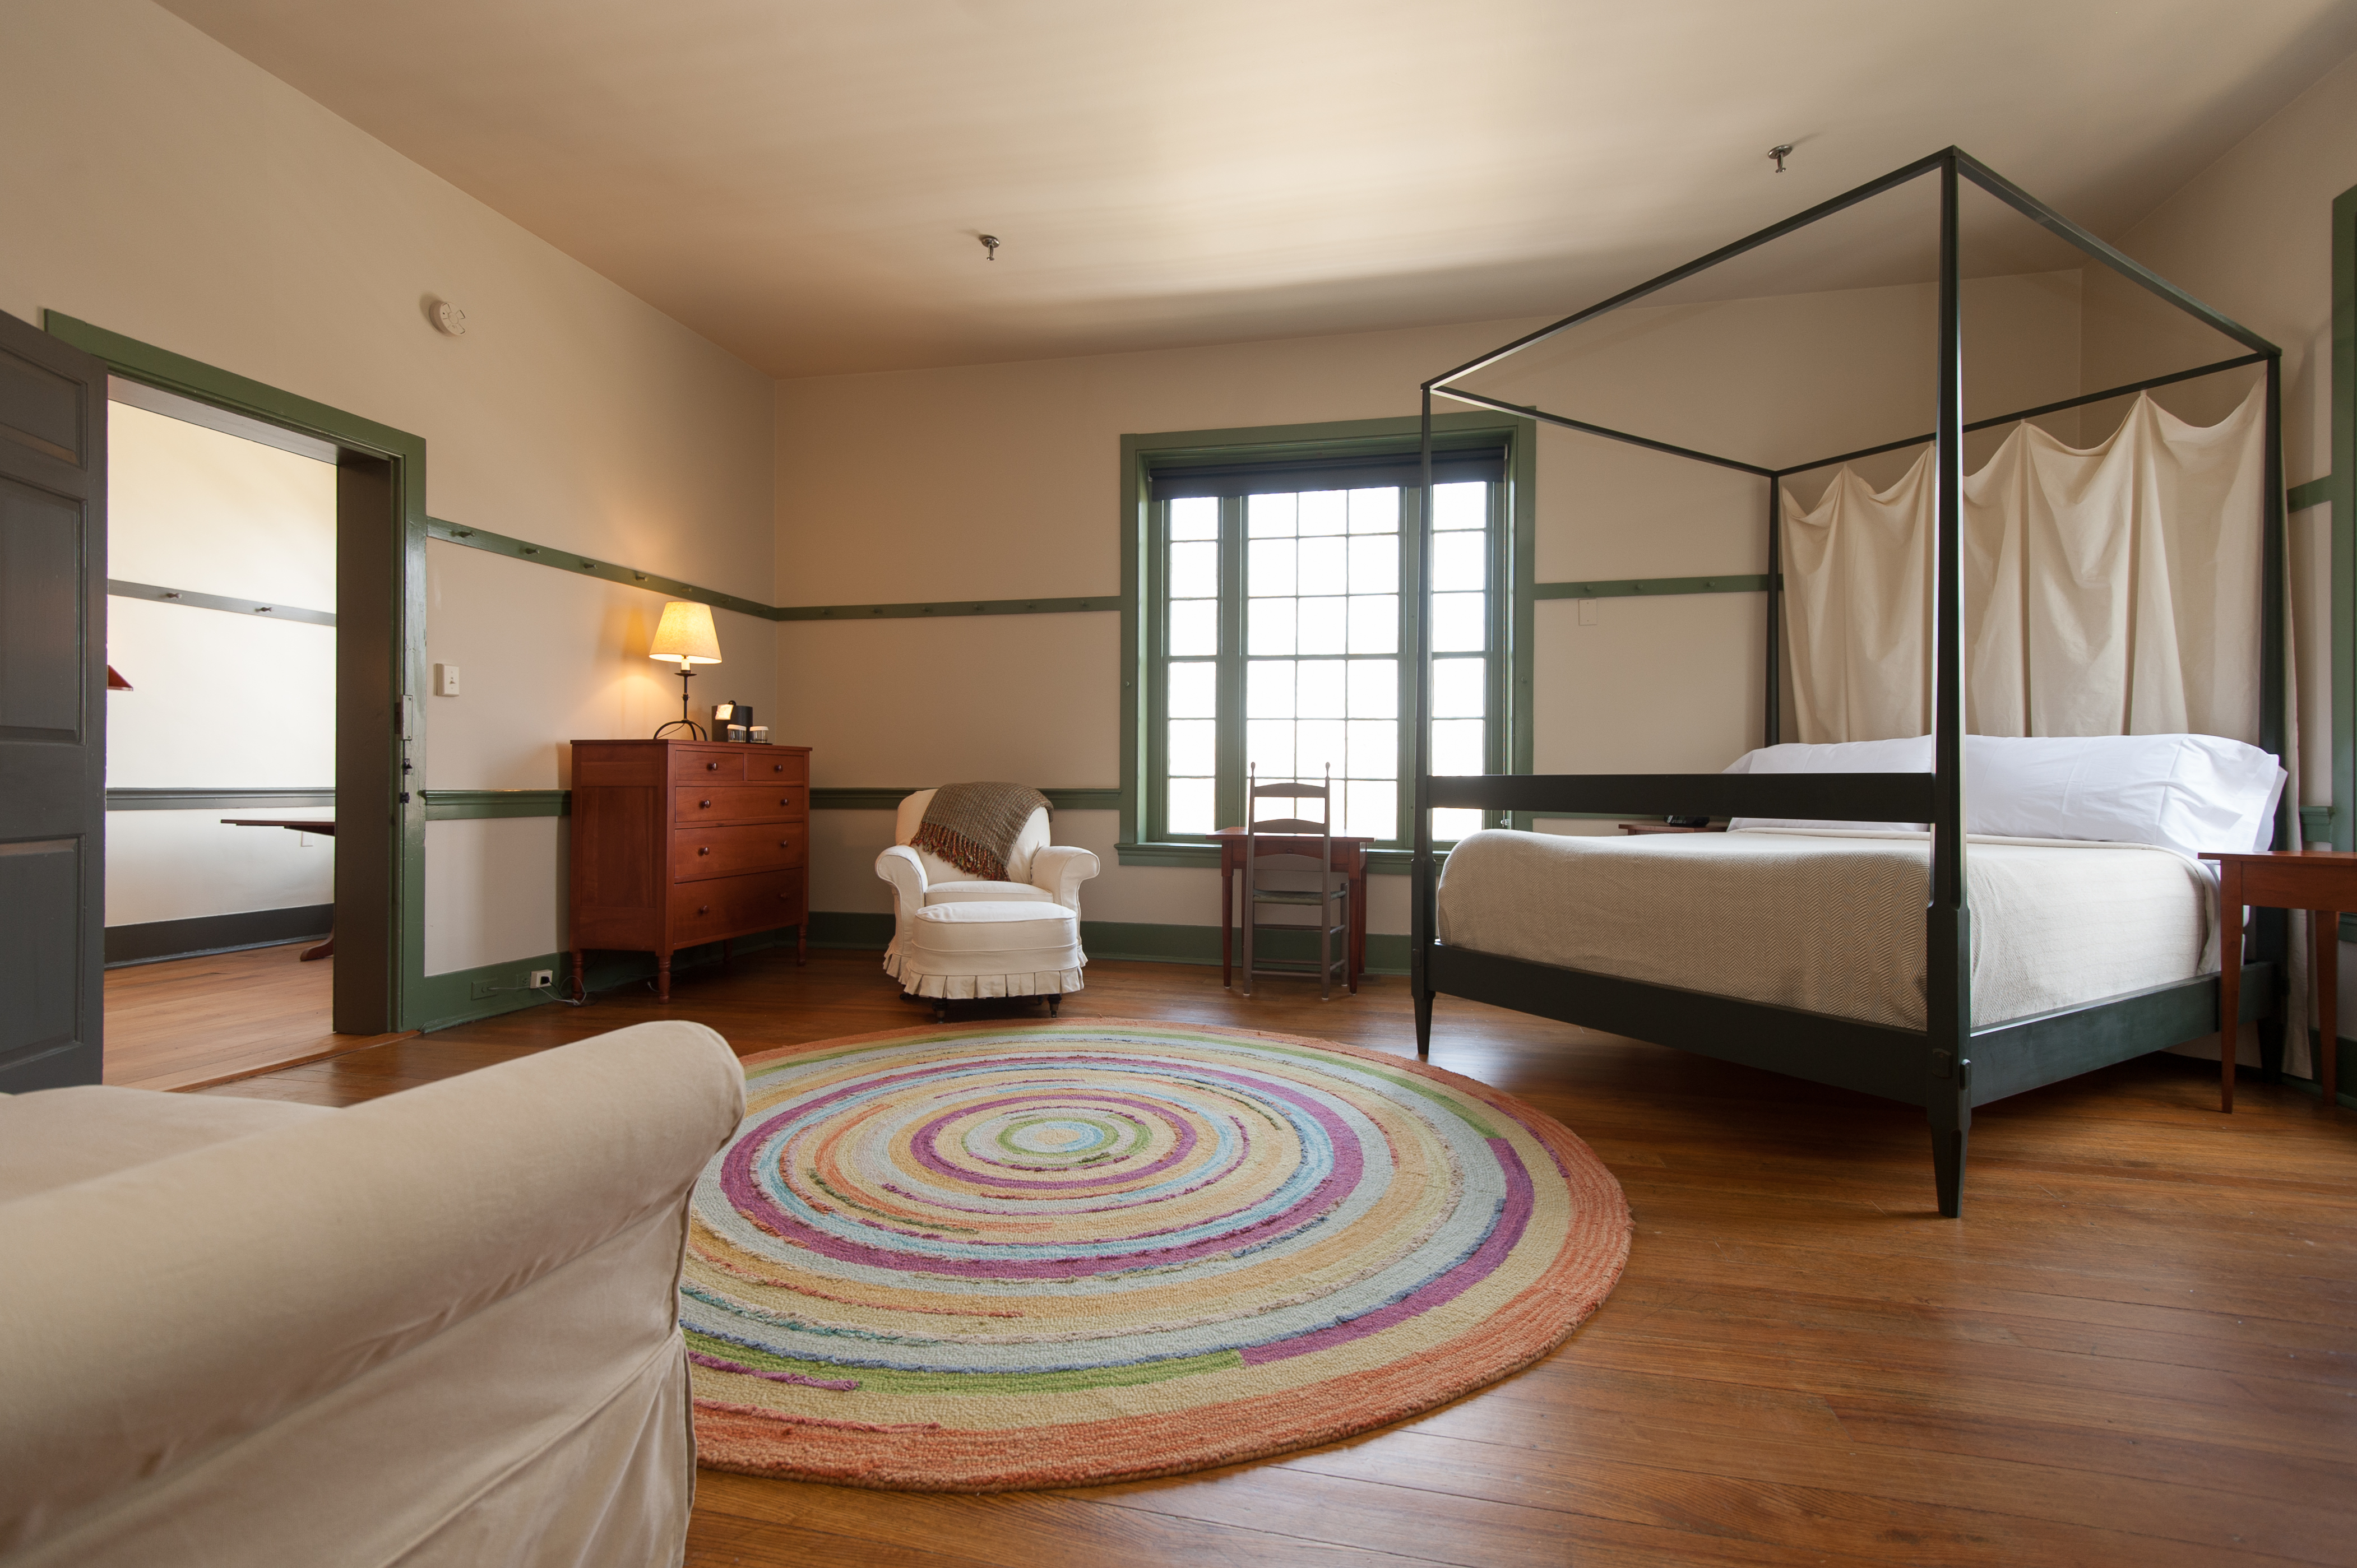 The Inn at Shaker Village. Hotel. Overnight Rooms. Accommodations. Stay. Retreat. 